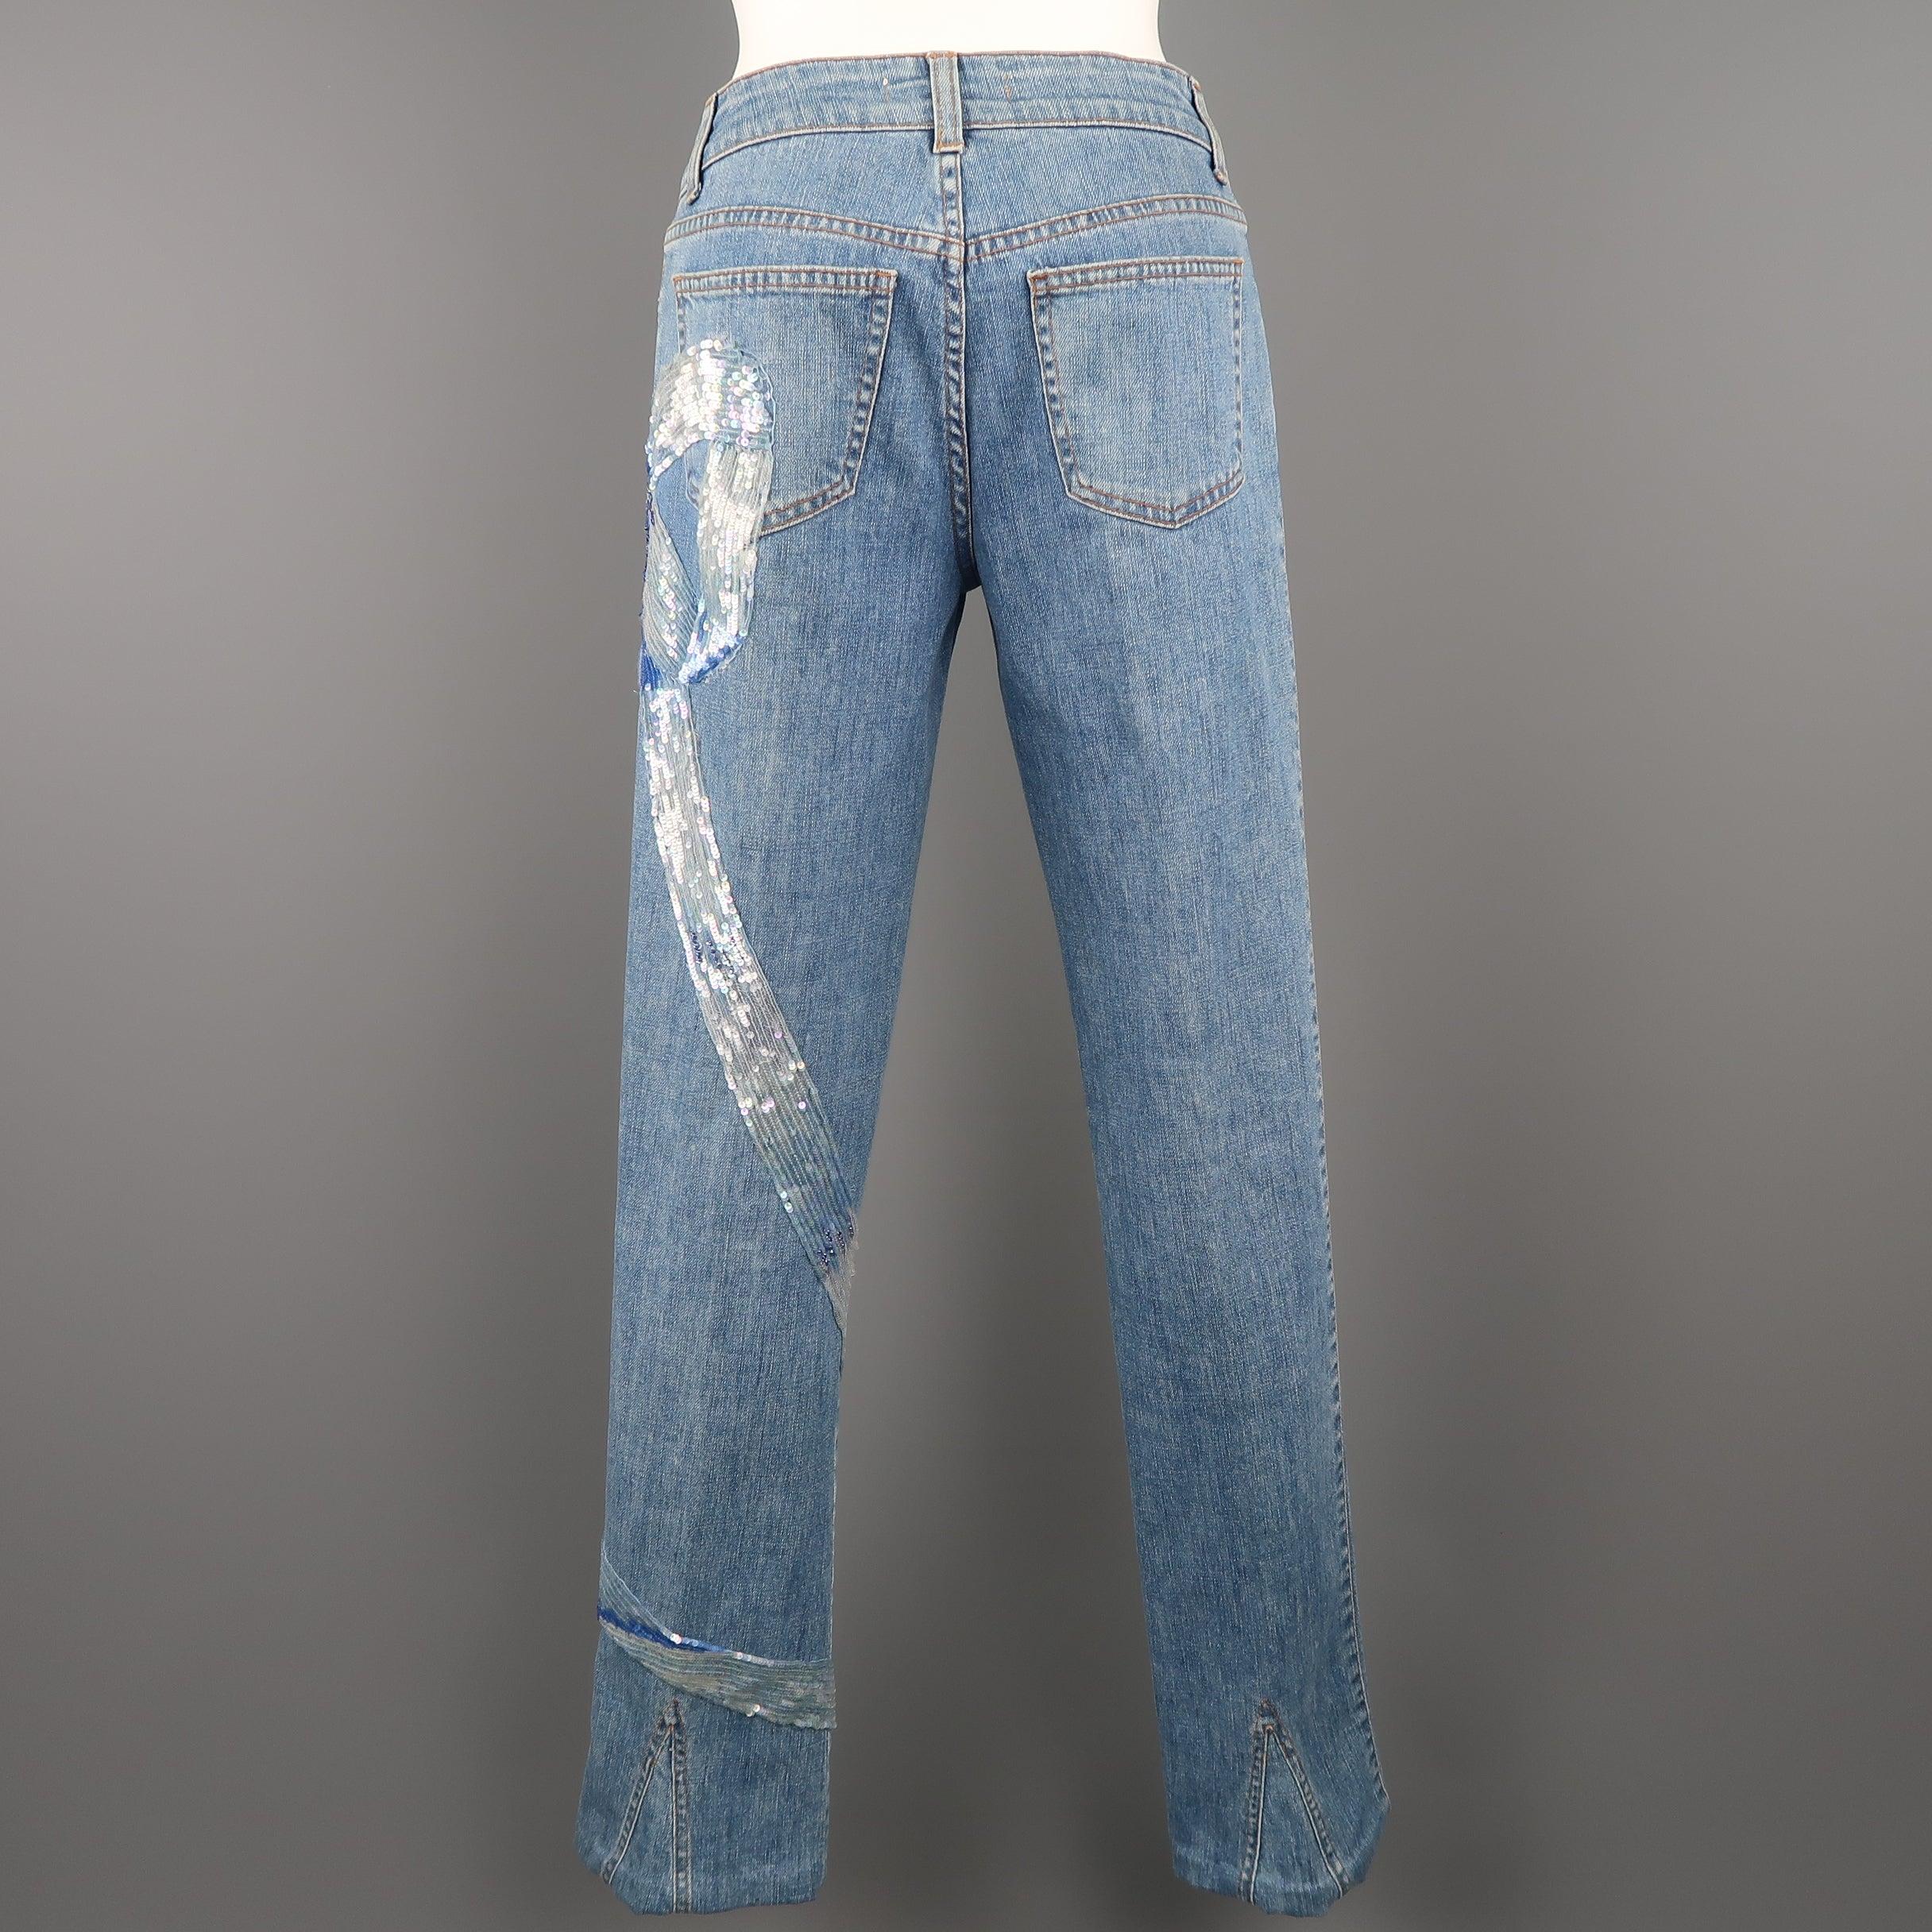 VALENTINO jeans come in a light wash stretch denim with a light blue sequin beaded bow motif down the side. Made in Italy.Excellent Pre-Owned Condition. 

Marked:   4 

Measurements: 
  Waist: 29 inches Rise: 8.5 inches Inseam: 32 inches 
  
  
